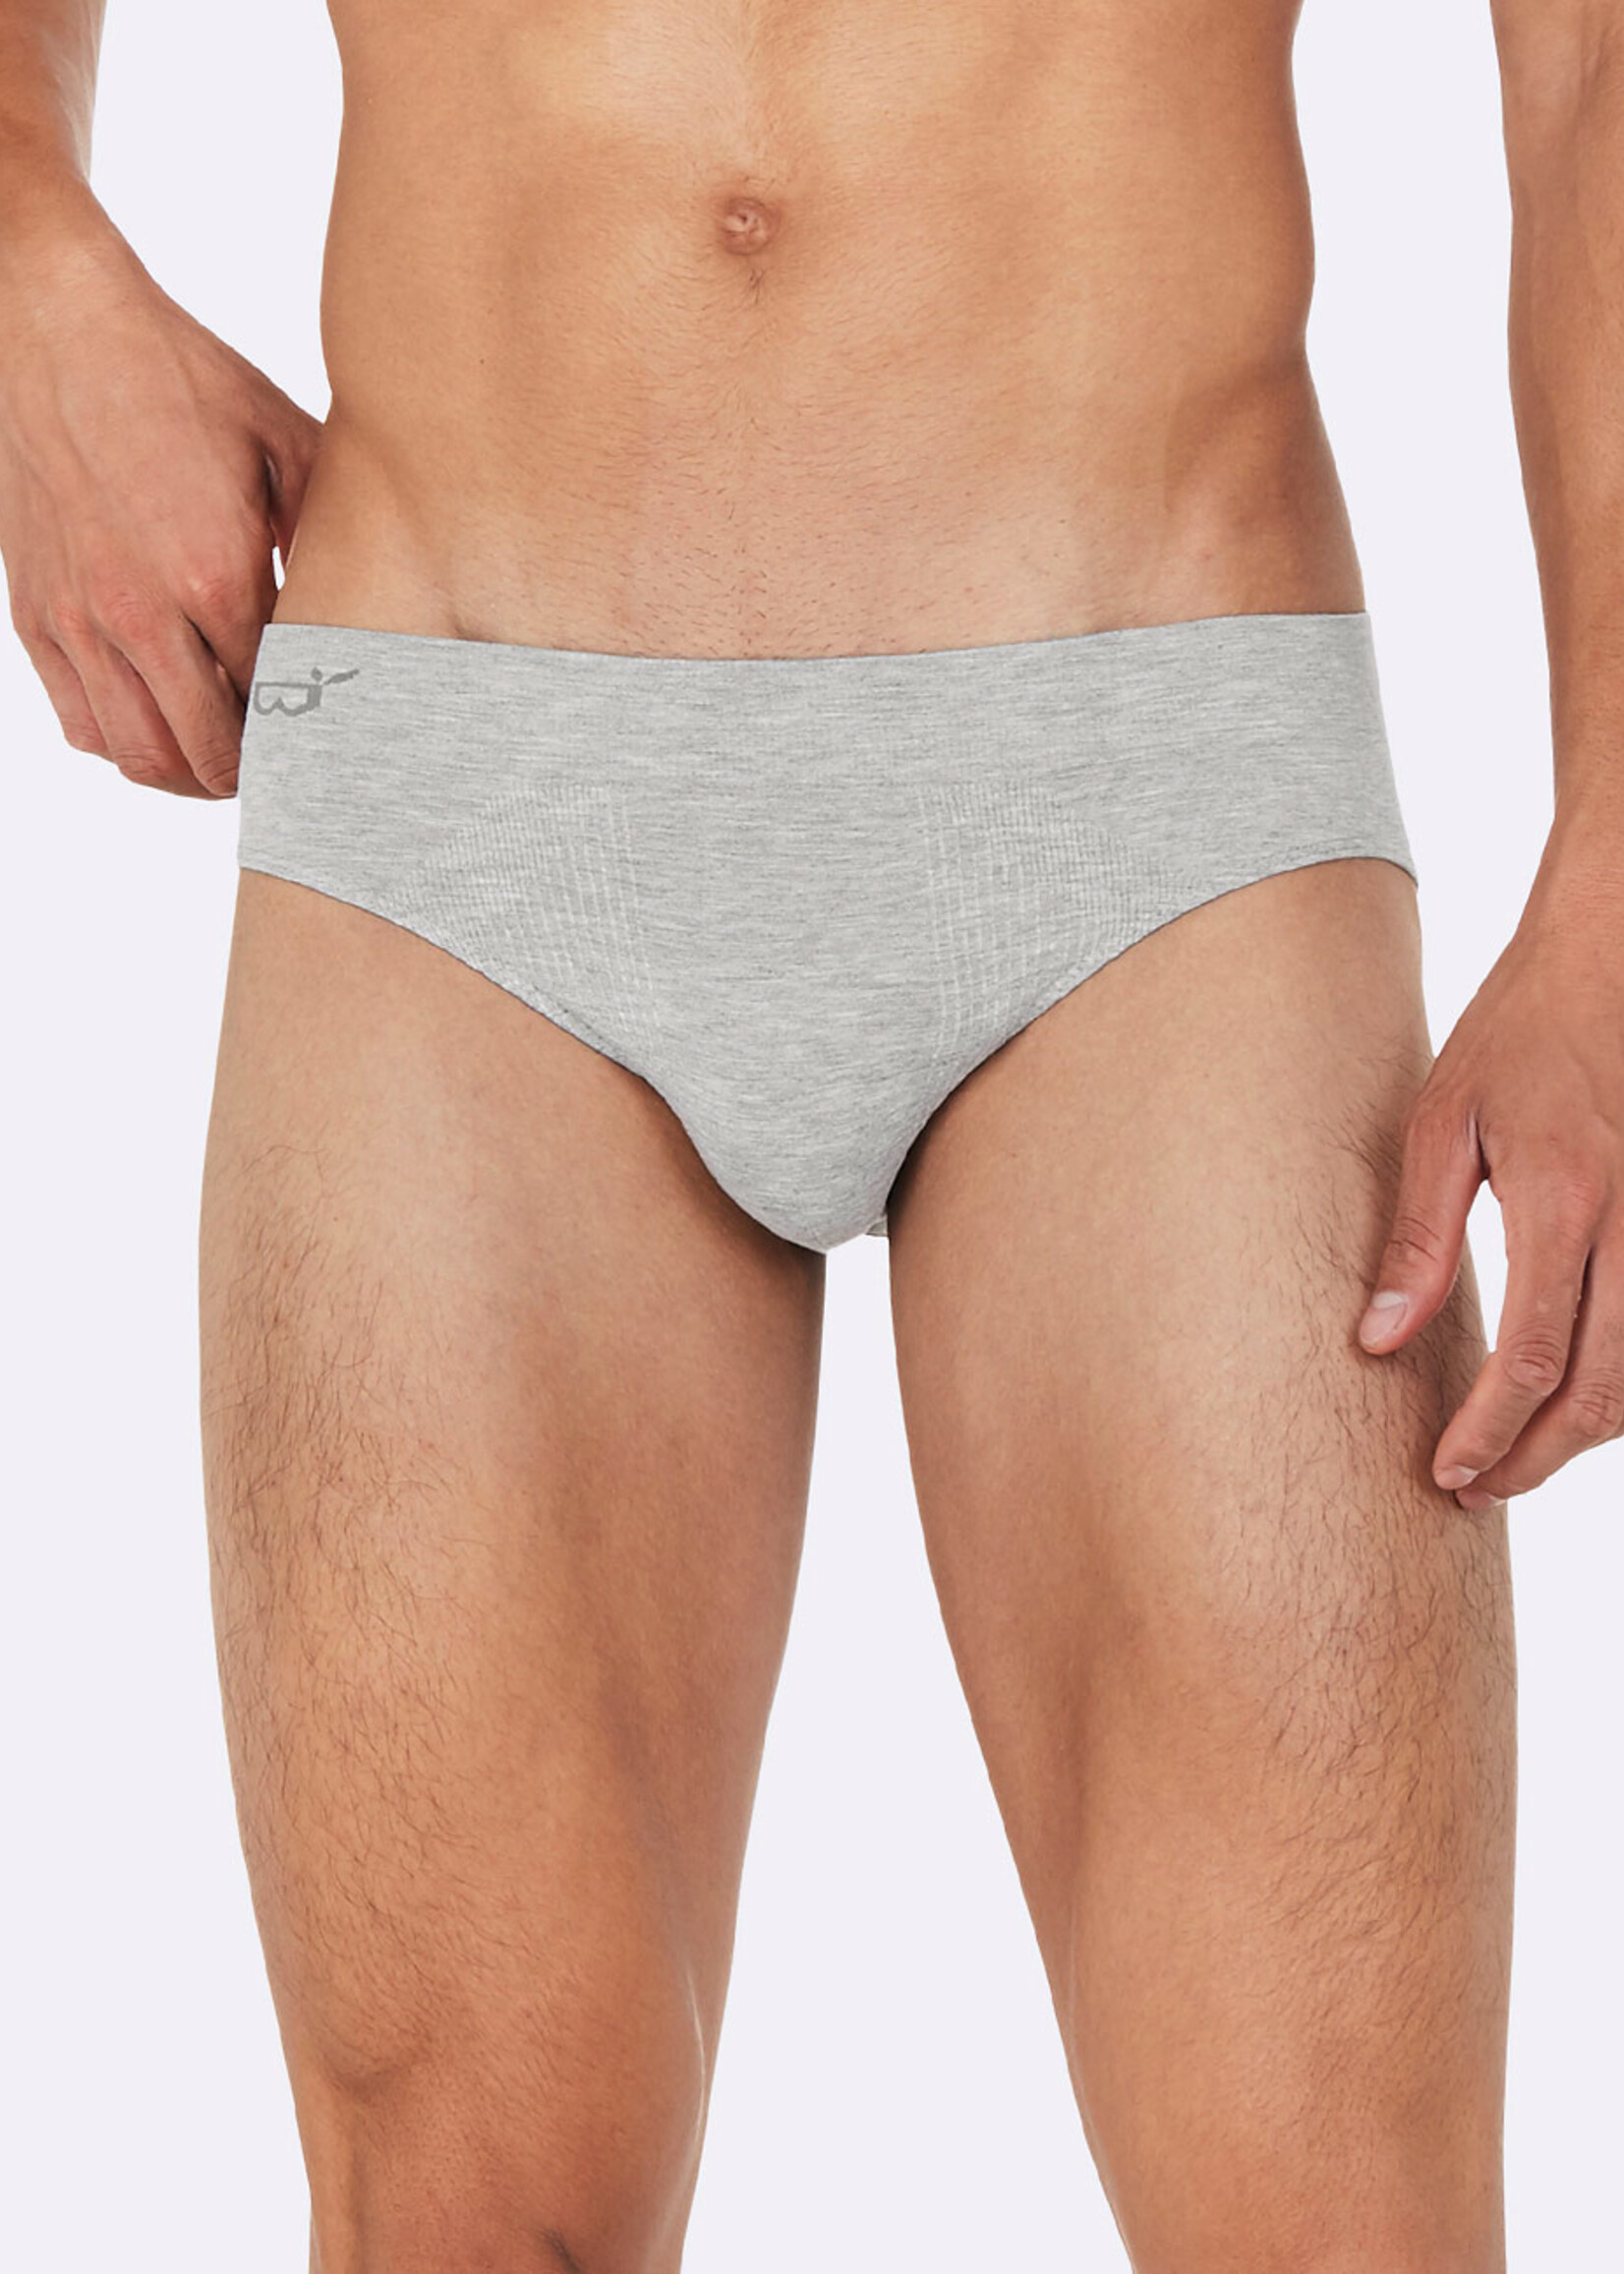 Boody bamboo seam-free briefs - same day despatch on orders before 2pm